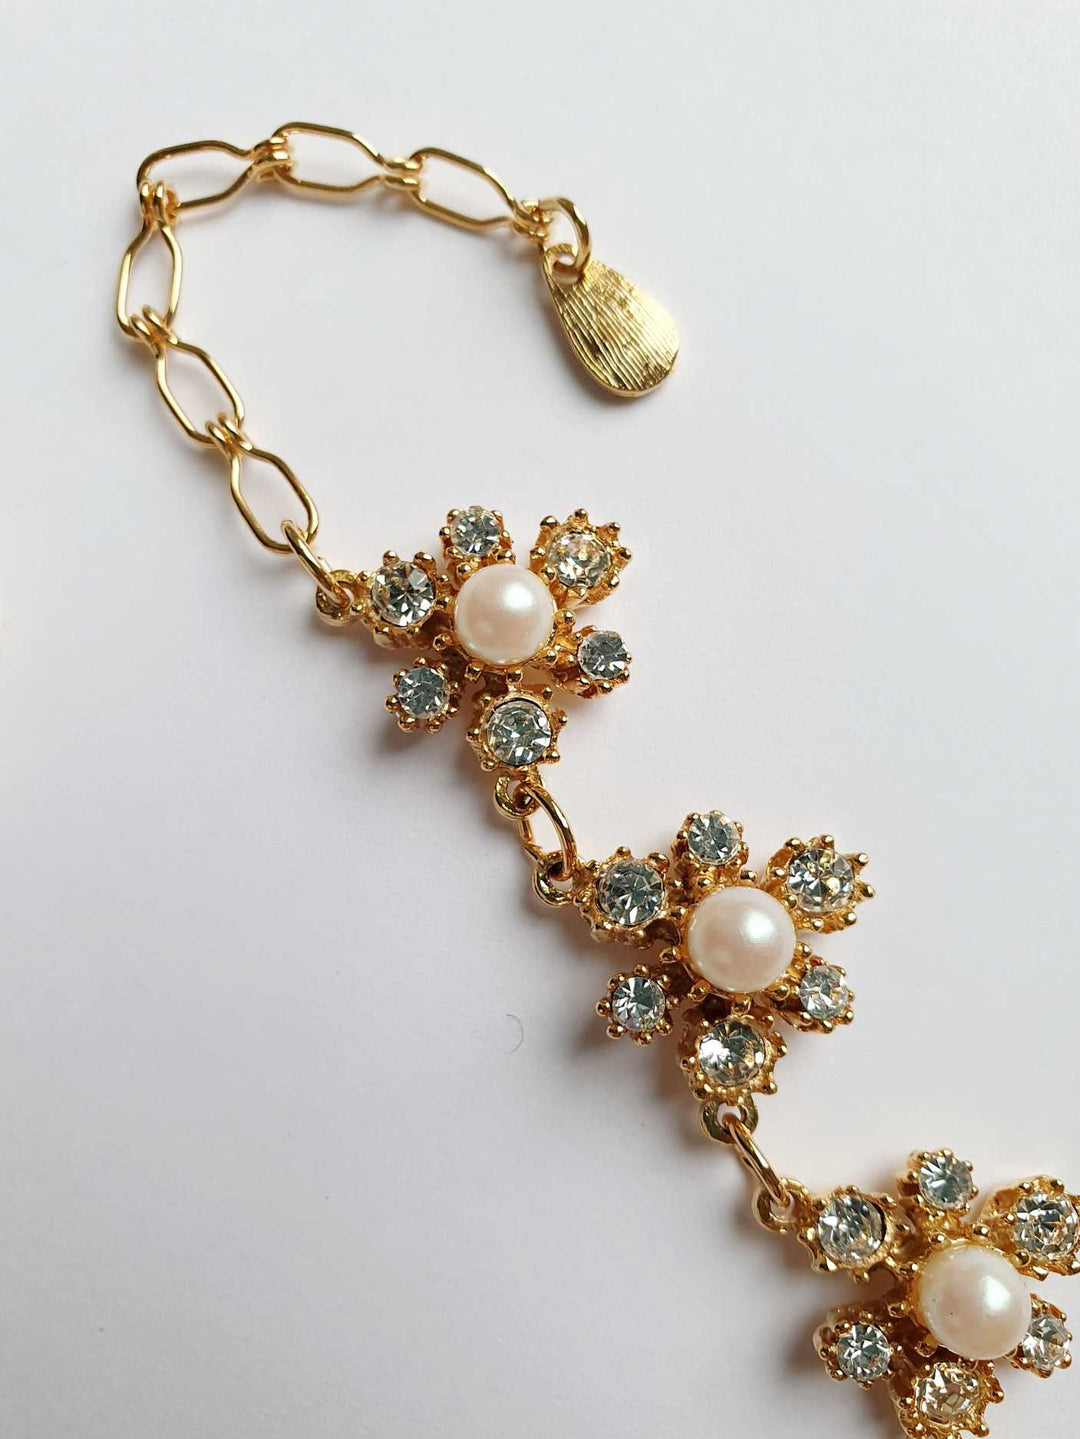 Vintage Gold Plated Statement Pearls & Crystals Necklace